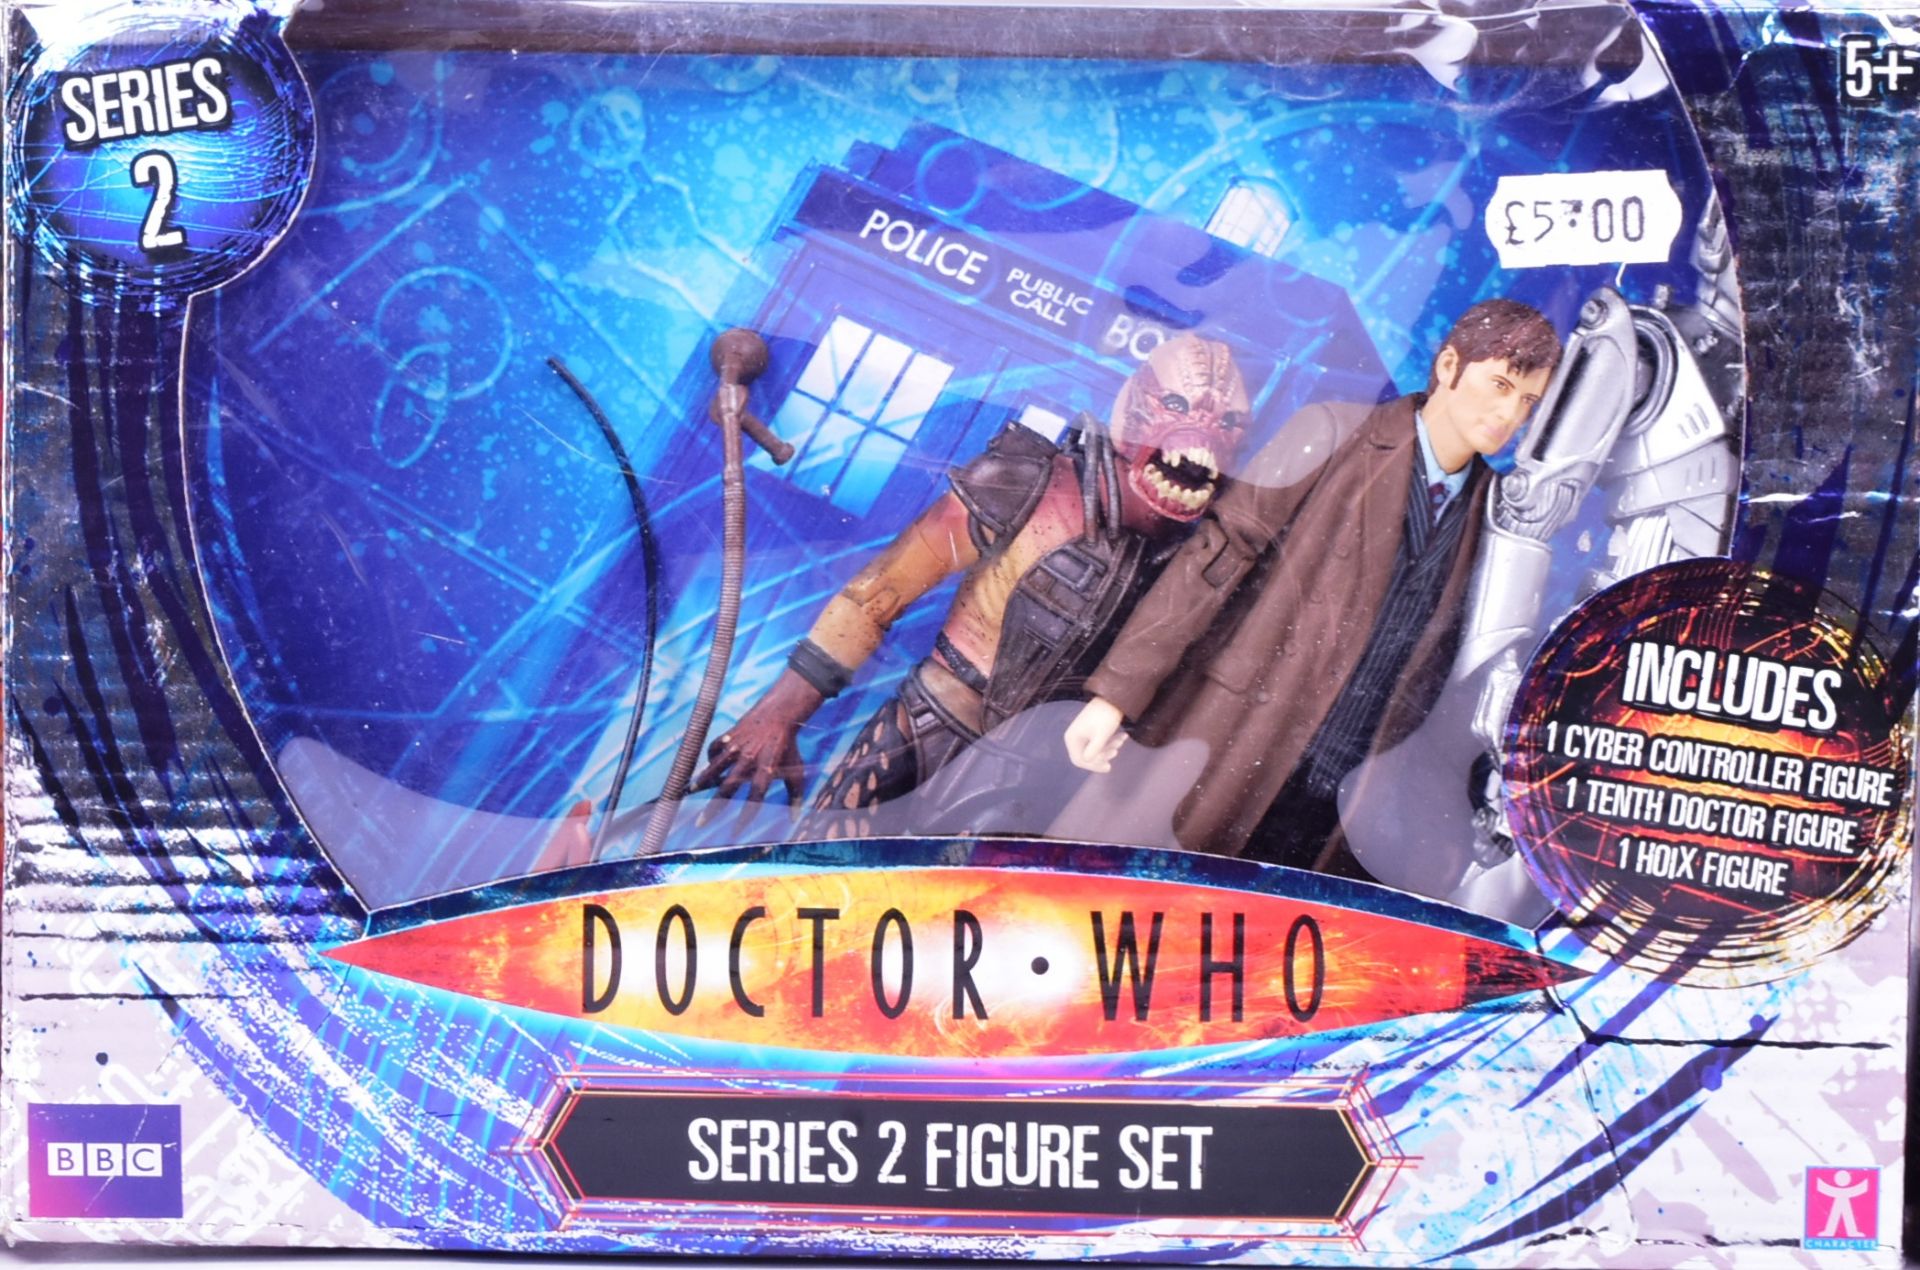 DOCTOR WHO - CHARACTER OPTIONS - 'SERIES' FIGURE SETS - Image 3 of 4